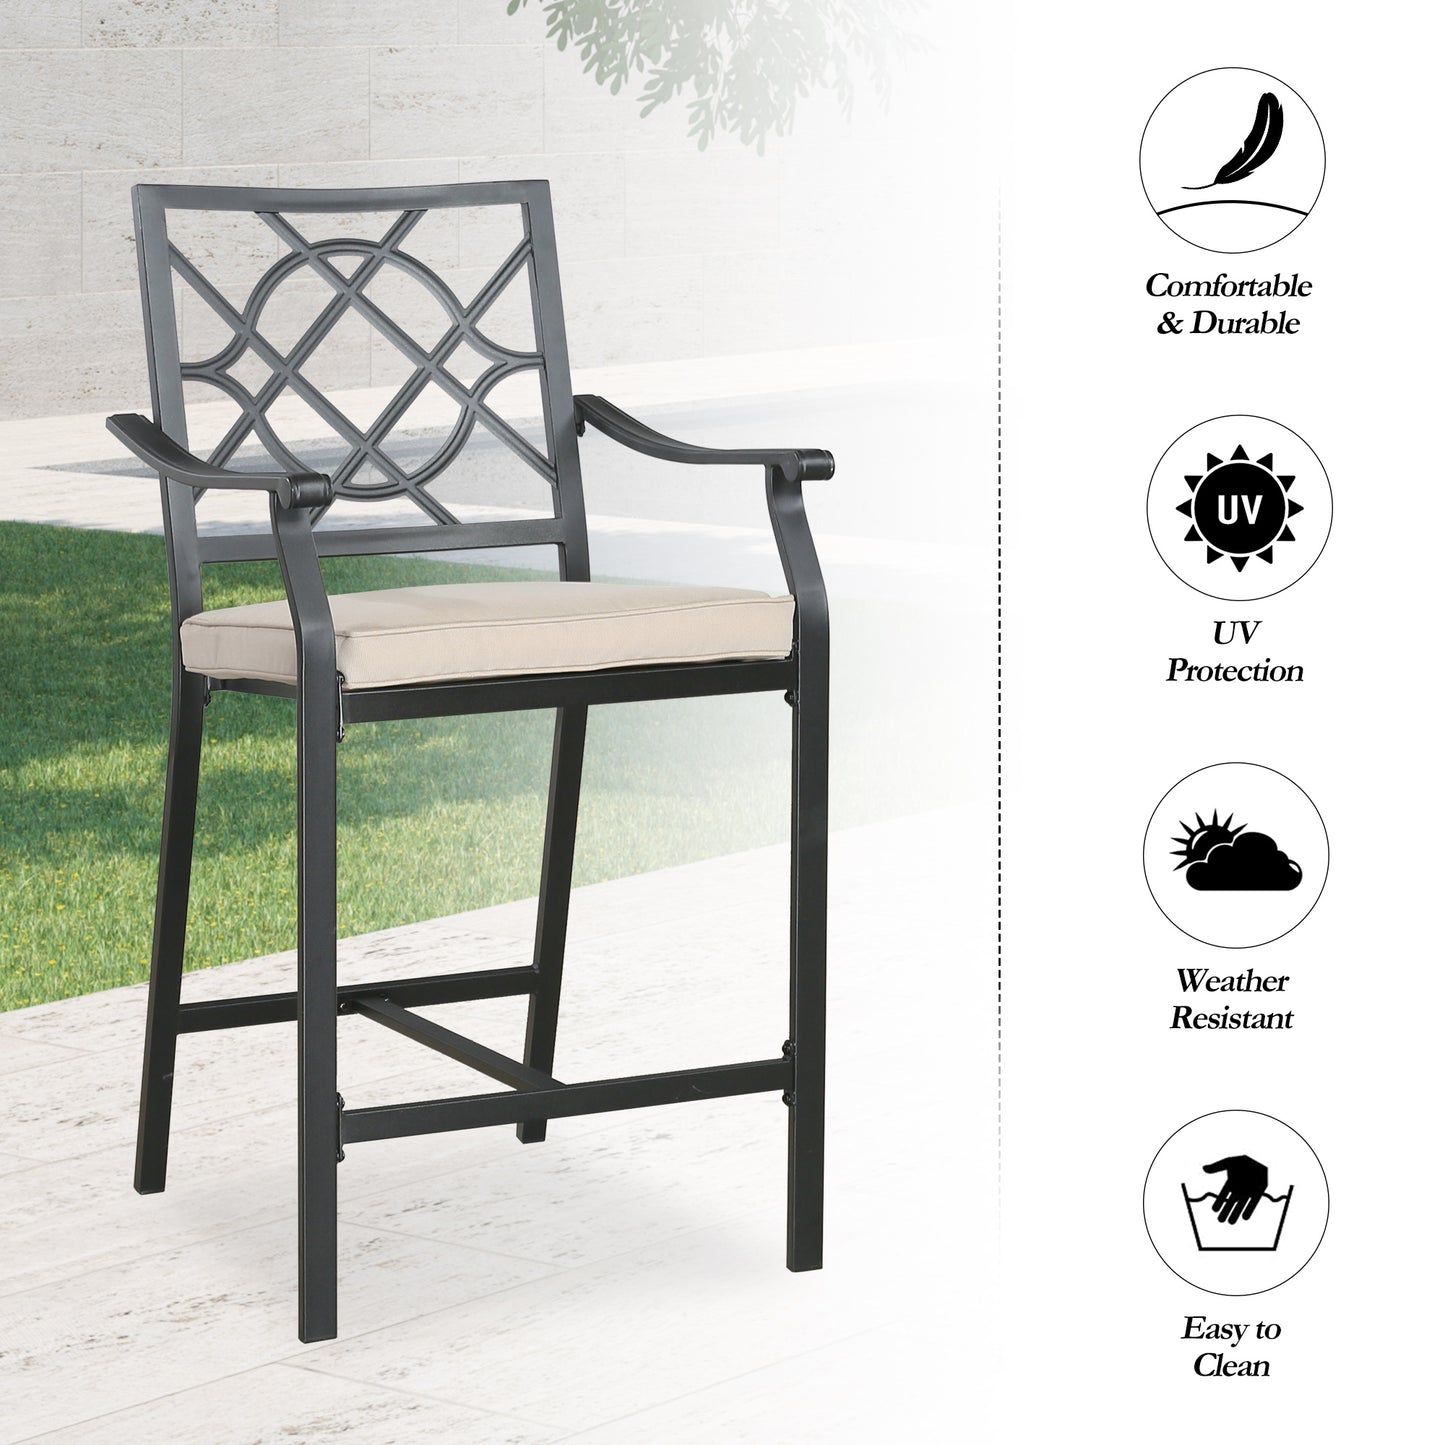 Outdoor 5 Pieces Patio Bar Height Dining Set with Square Steel Table and Bar Stools with Beige Seat Cushions